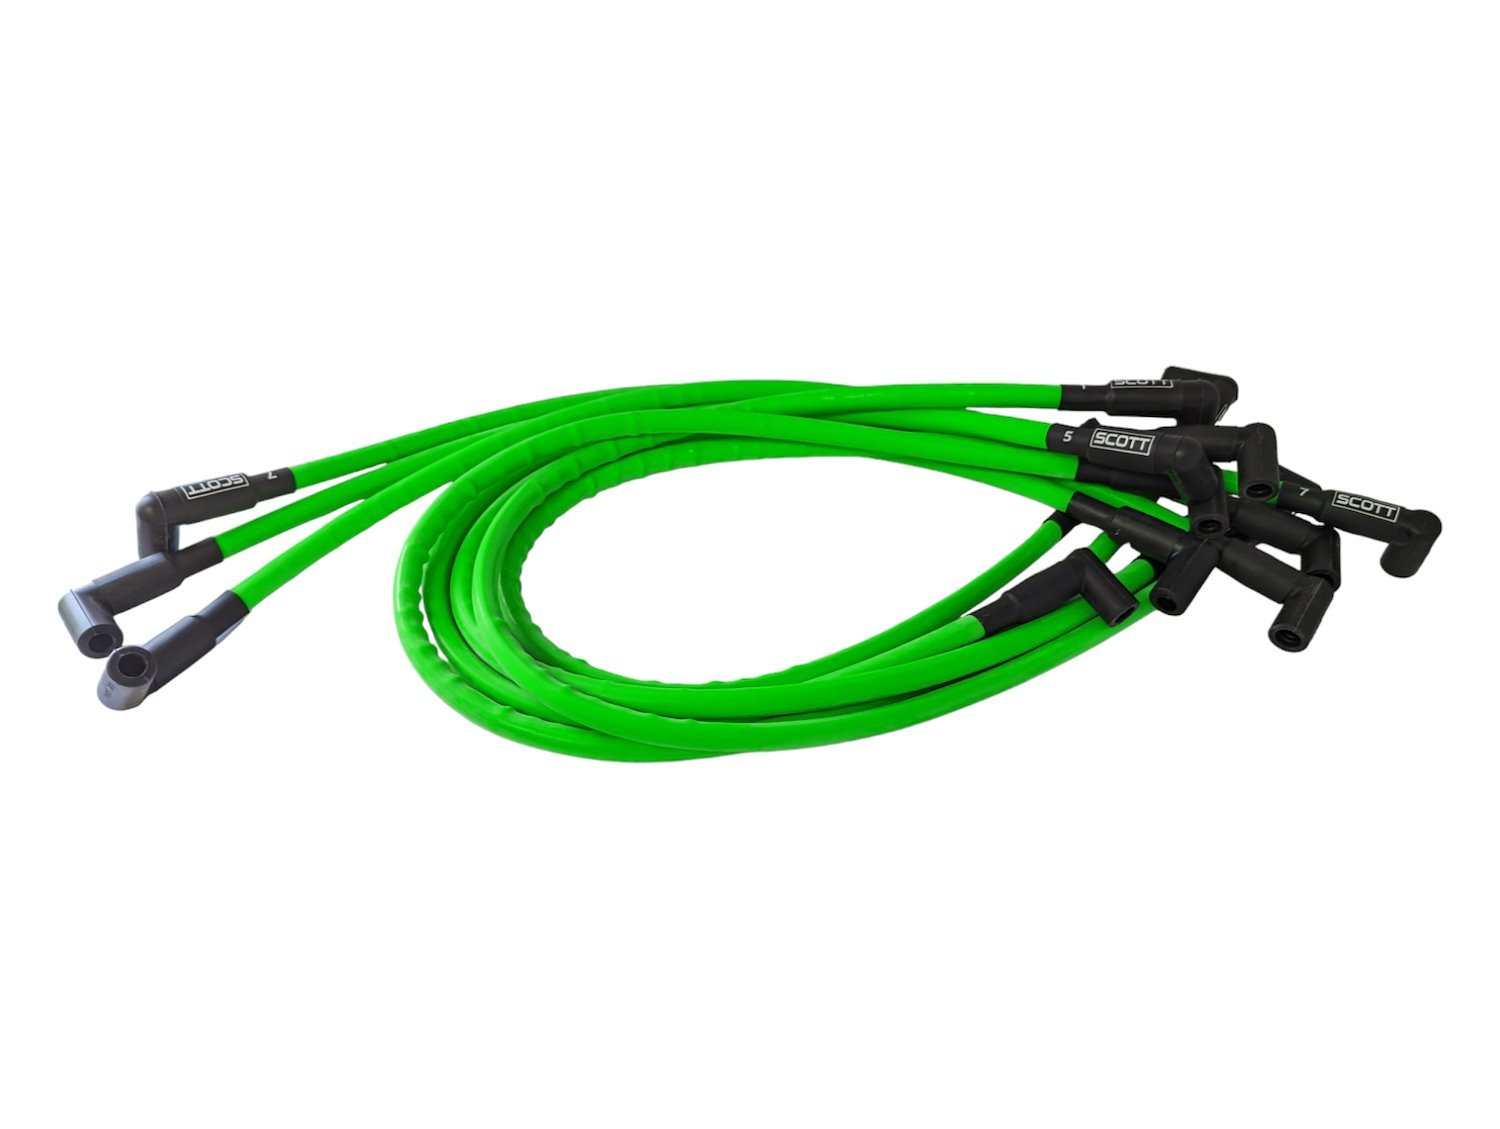 SPW-CH-435-8 High-Performance Silicone-Sleeved Spark Plug Wire Set for Small Block Chevy, Around Front [Fluorescent Green]